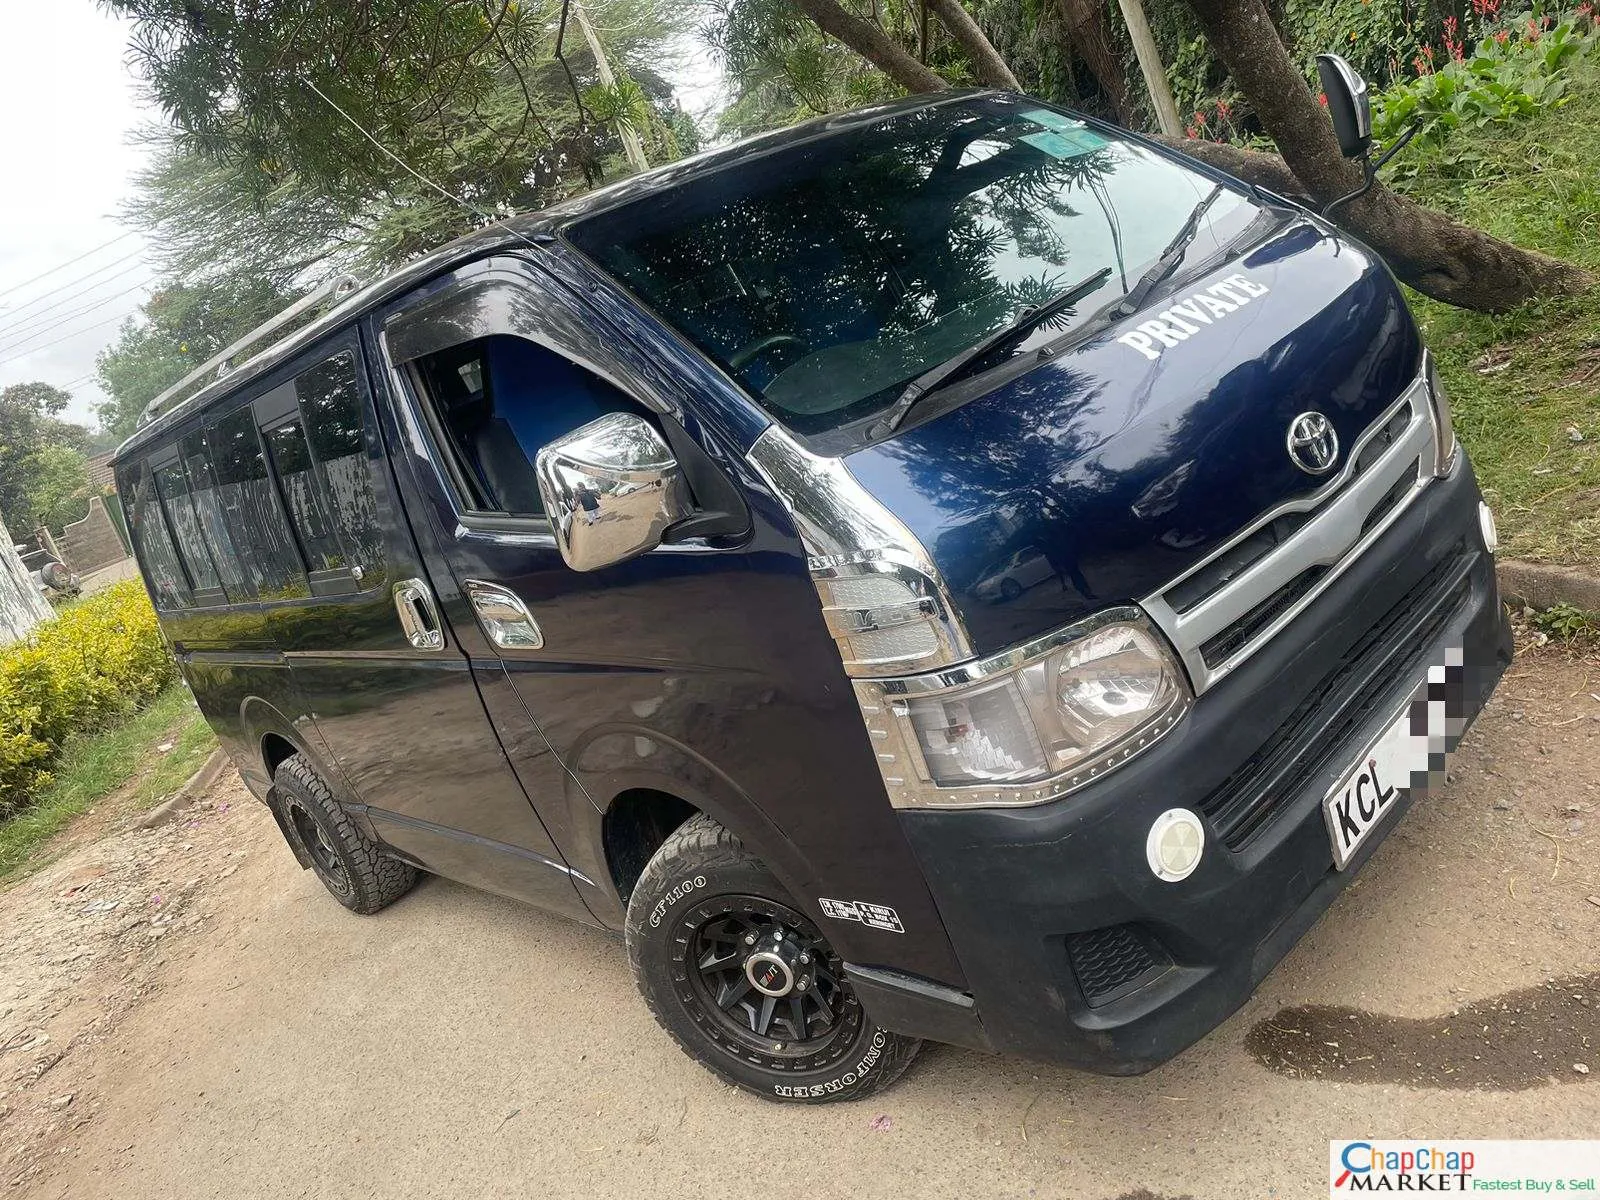 Cars For Sale/Vehicles Cars-Toyota HIACE 7L 14 SEATER Private 🔥 You Pay 40% DEPOSIT TRADE IN OK EXCLUSIVE 9